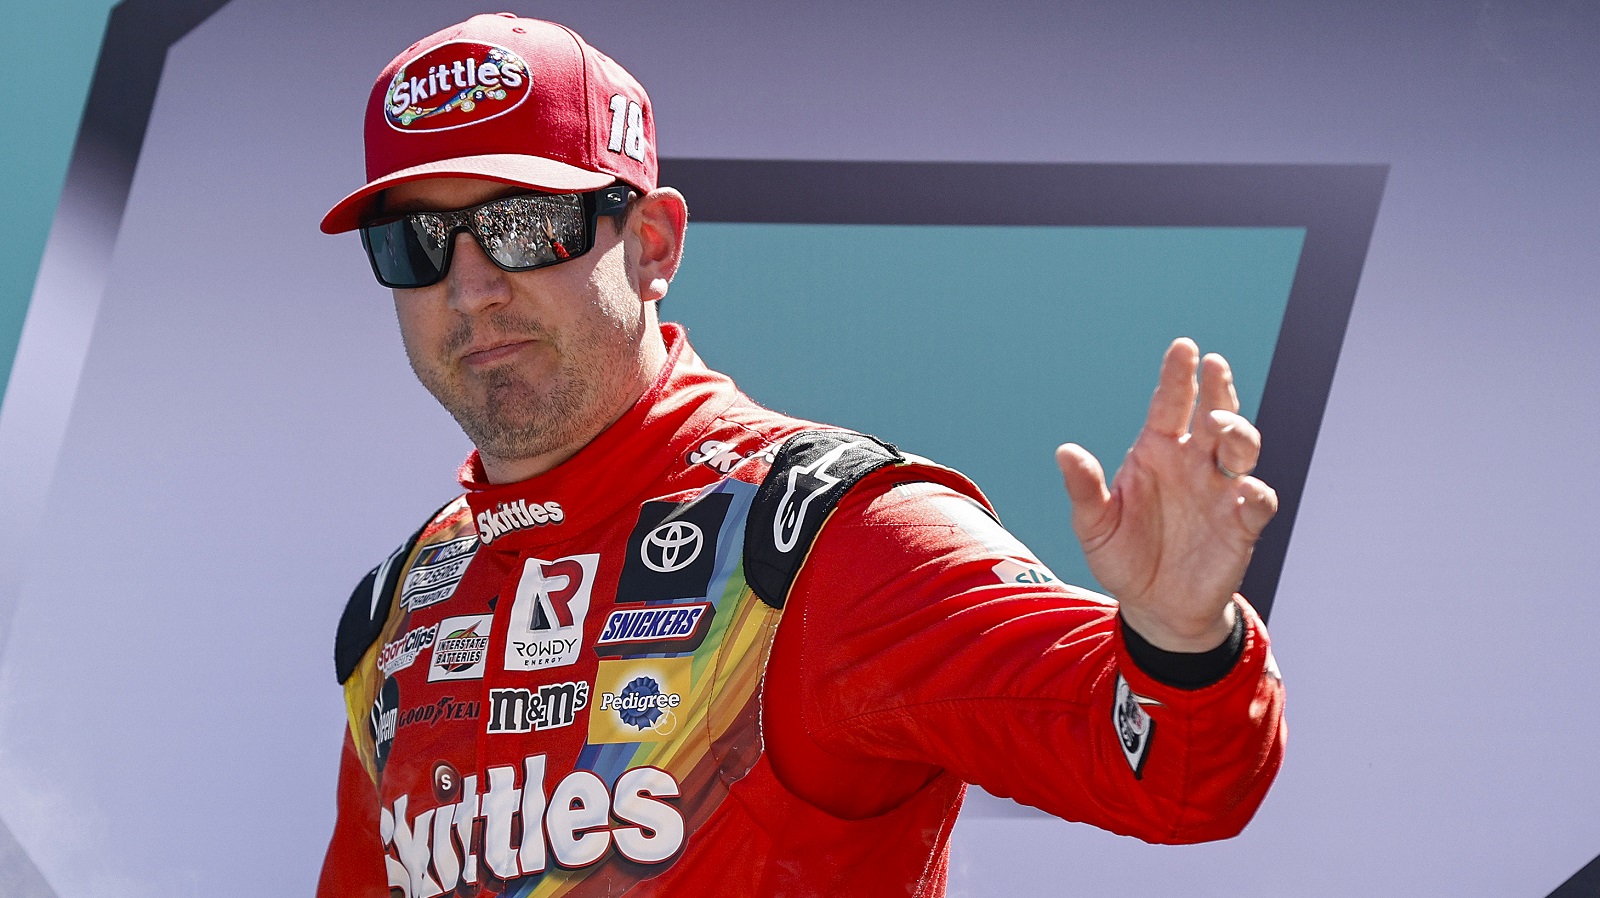 Kyle Busch waves to fans during driver intros prior to the NASCAR Cup Series Dixie Vodka 400 at Homestead-Miami Speedway on Oct. 23, 2022 in Homestead, Florida. | Sean Gardner/Getty Images